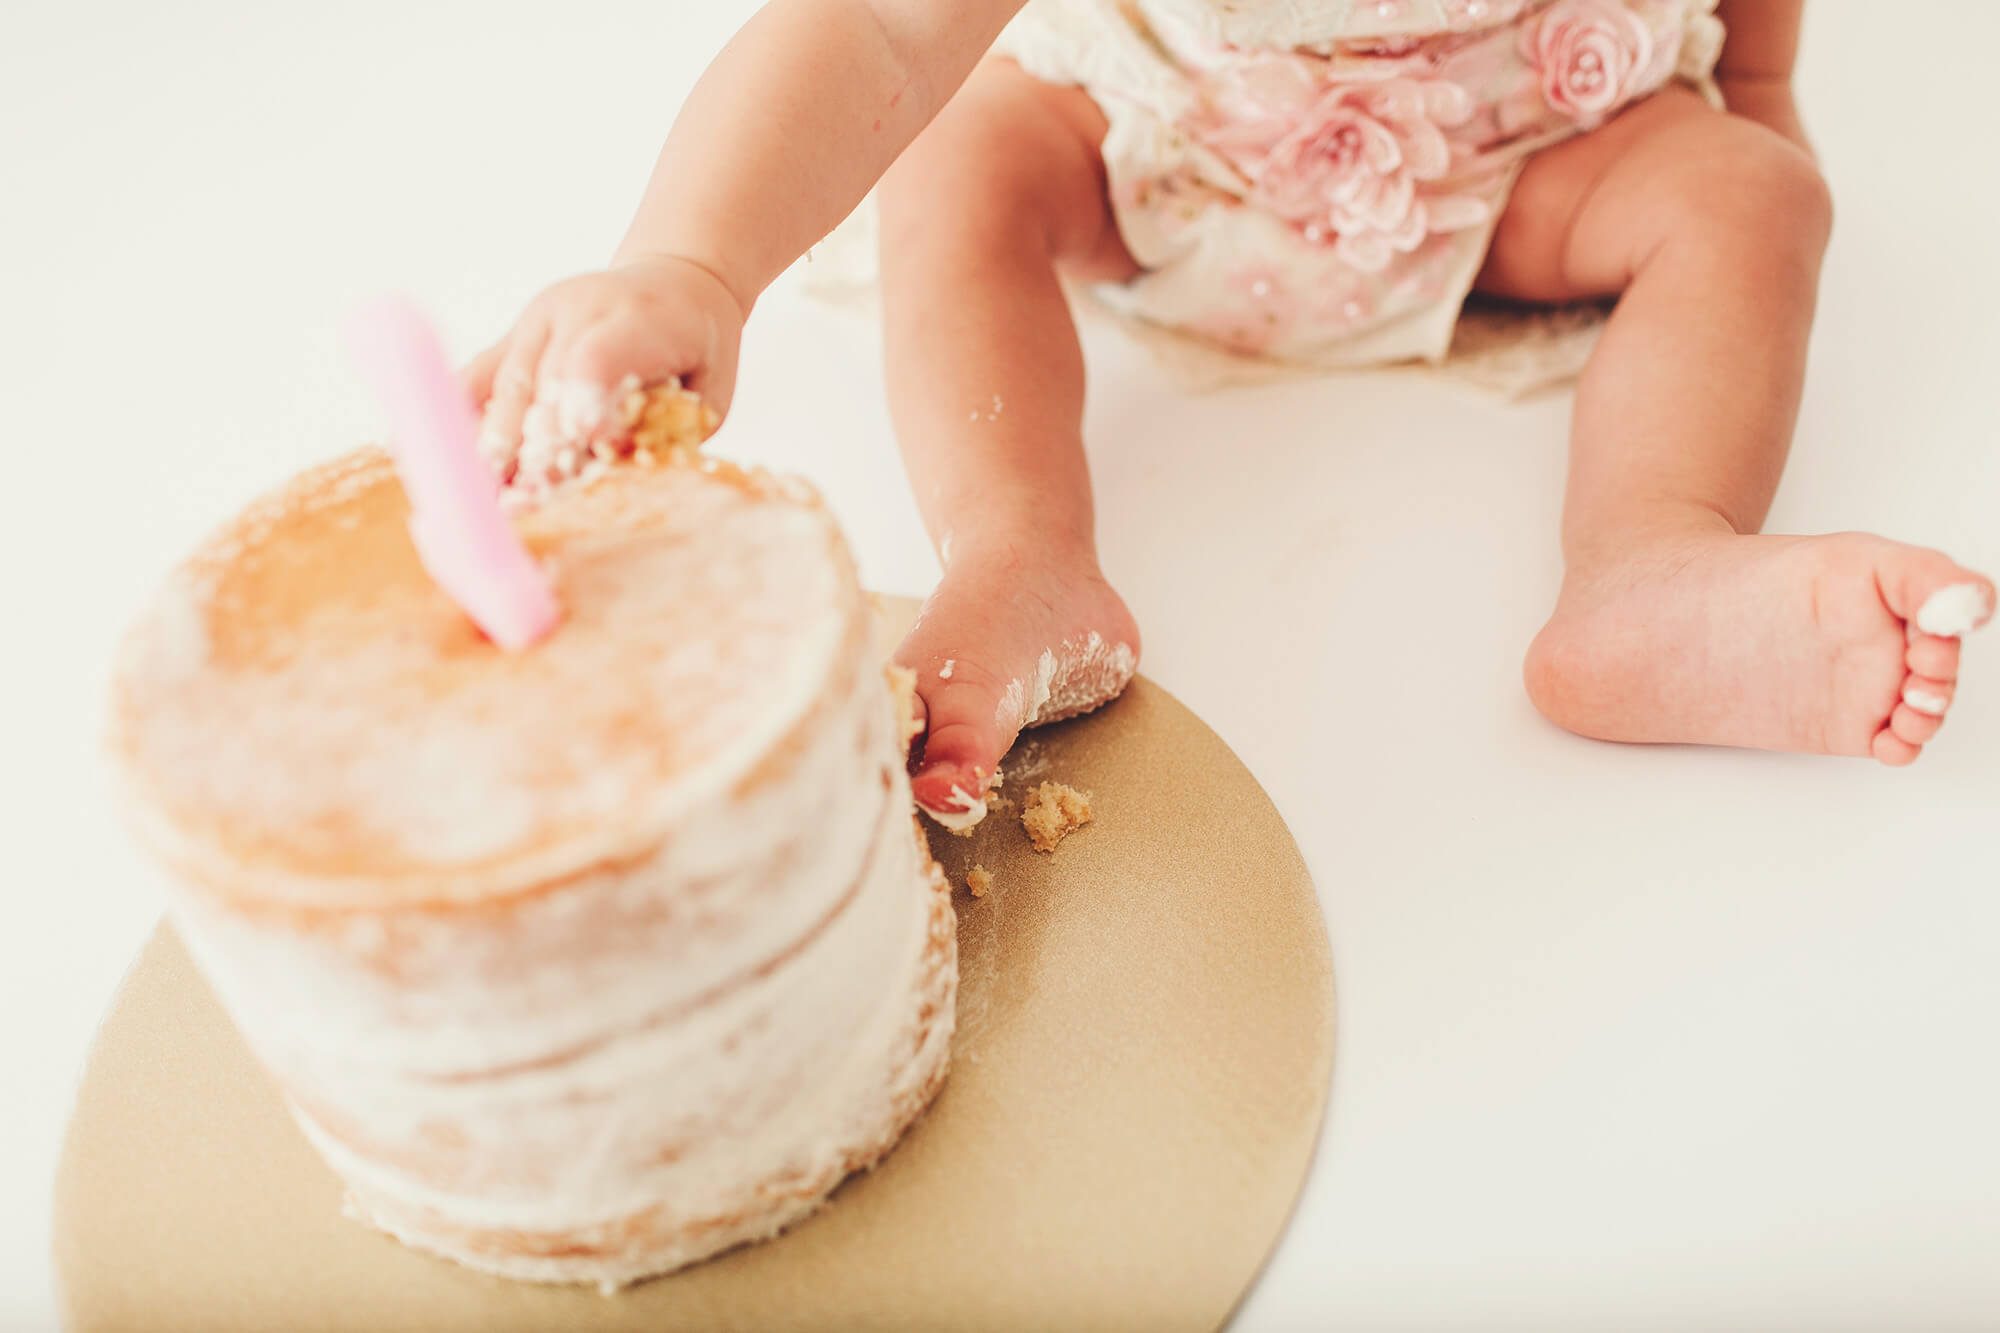 Fingers and toes covered in frosting during her birthday cake smash session